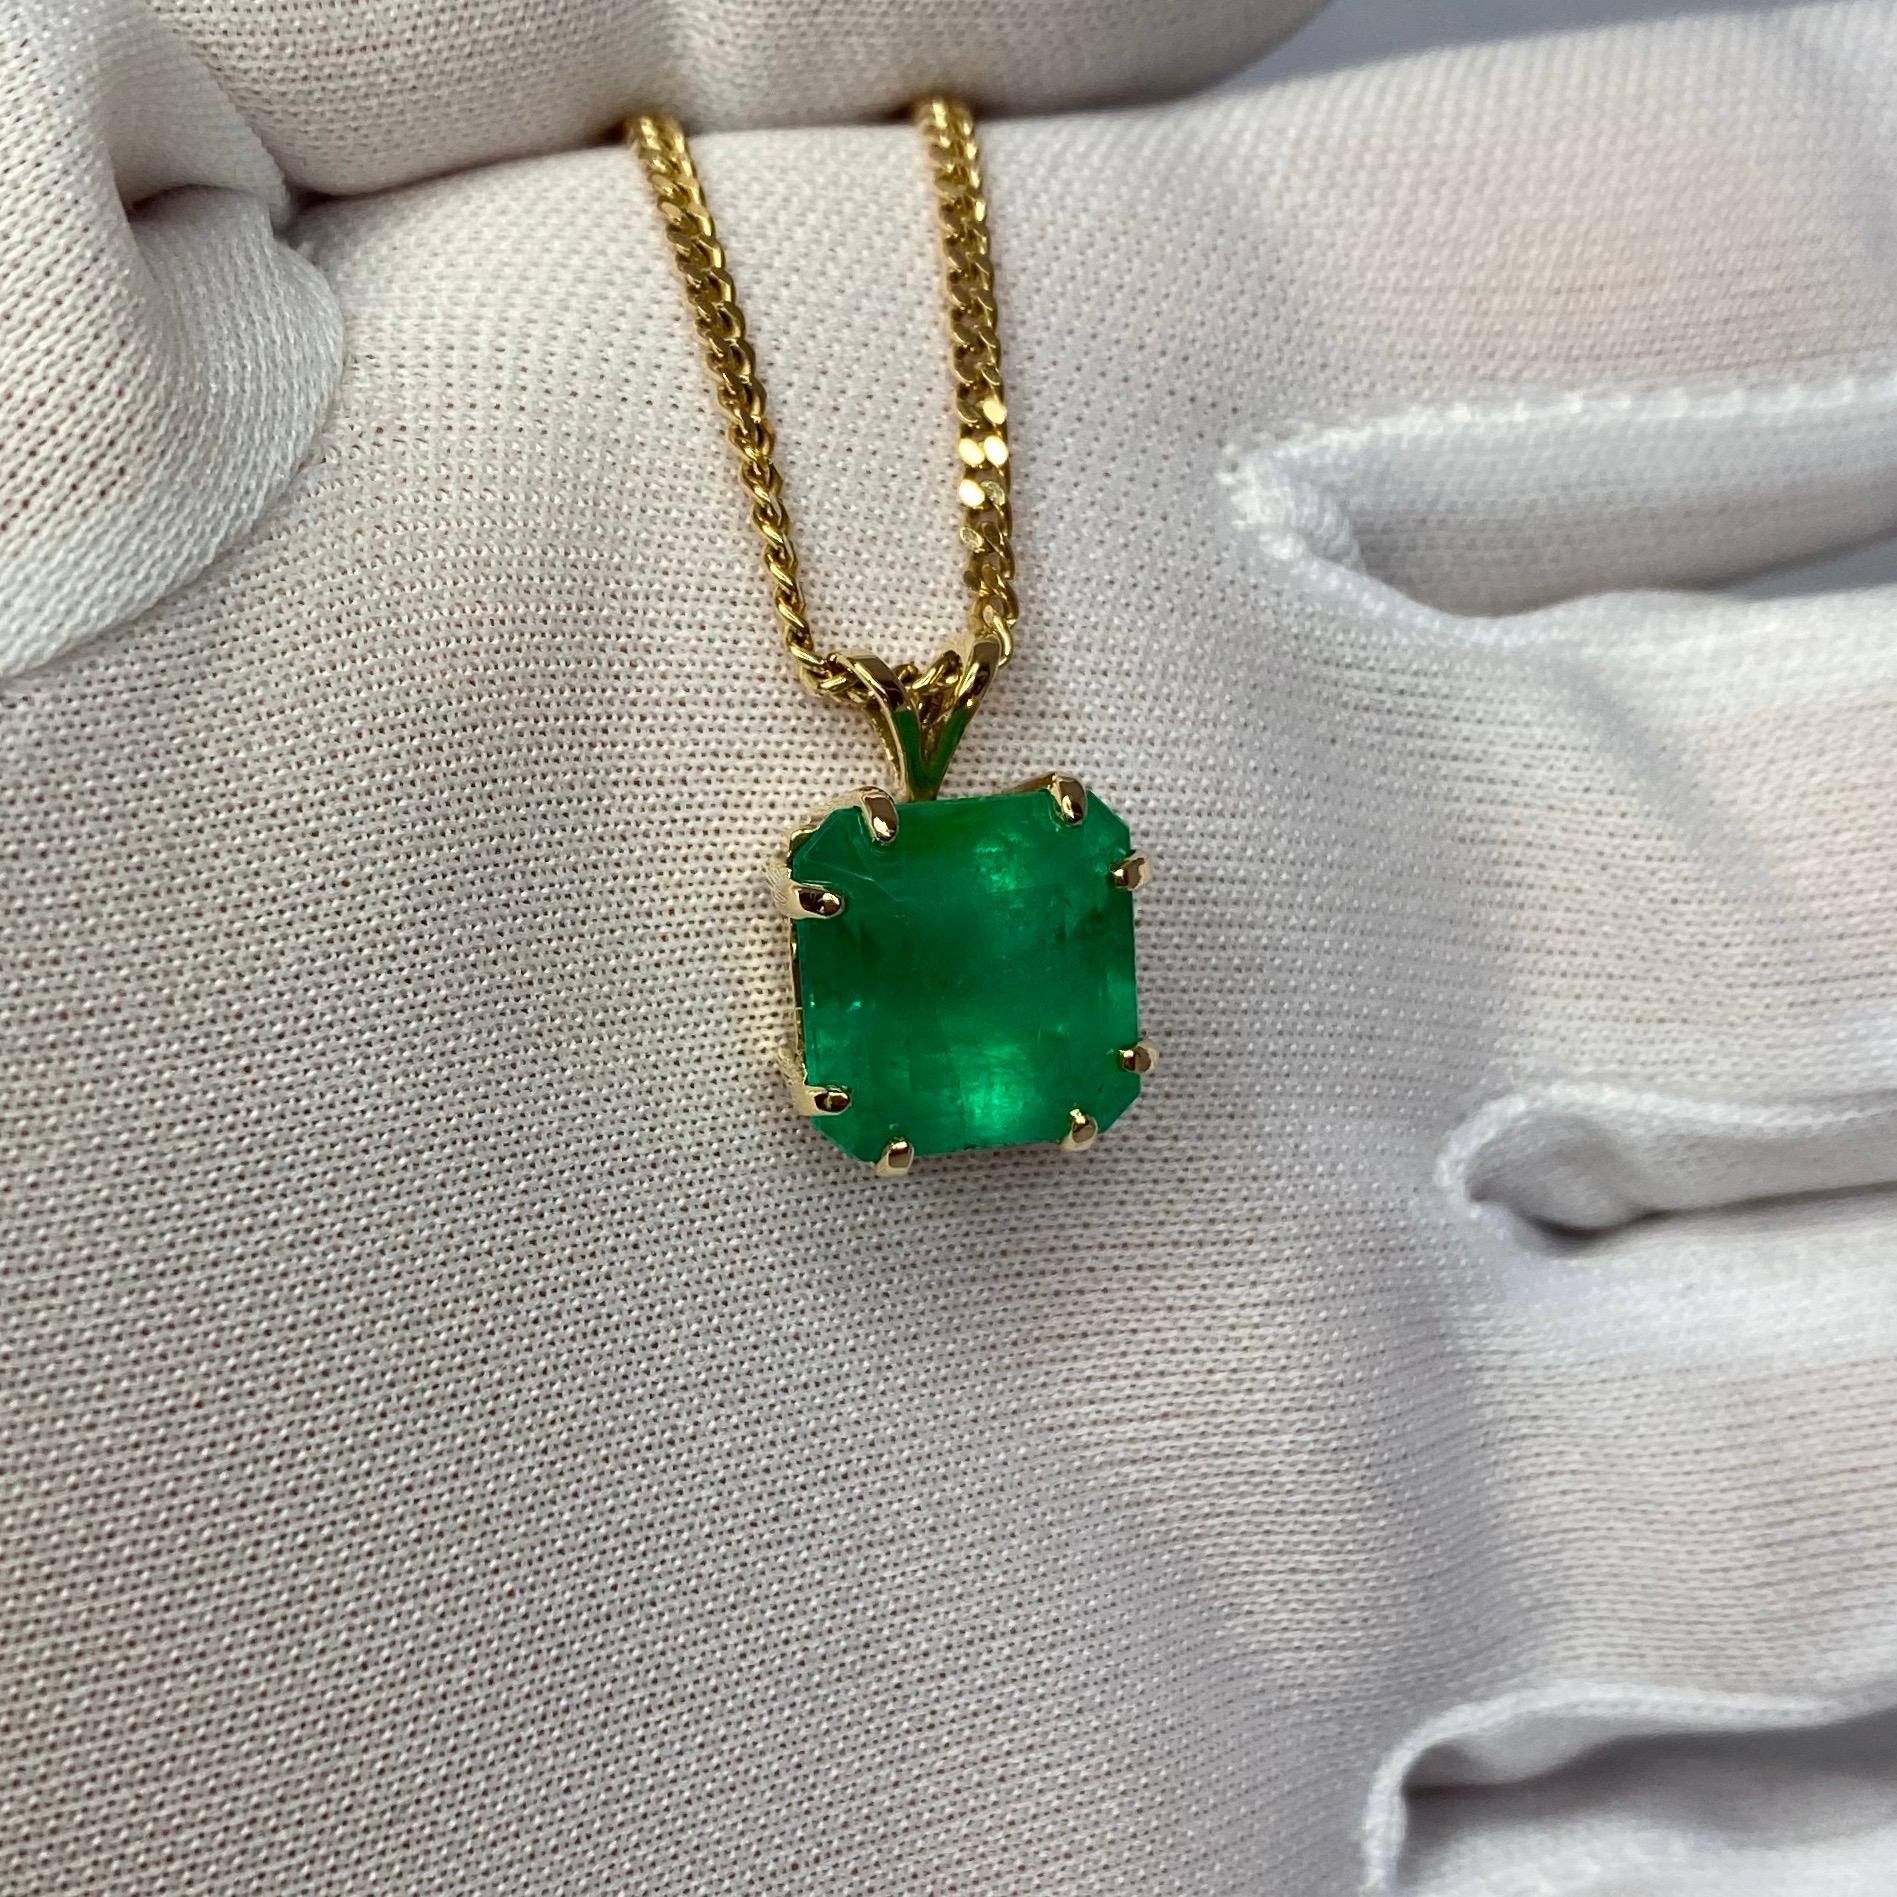 Large top quality 5.99 carat Colombian emerald set in a fine 14k yellow gold solitaire pendant.

Emerald fully certified by GIA New York Lab confirming stone as natural and Colombian in origin. Also describing treatment as only 'minor enhancement'.